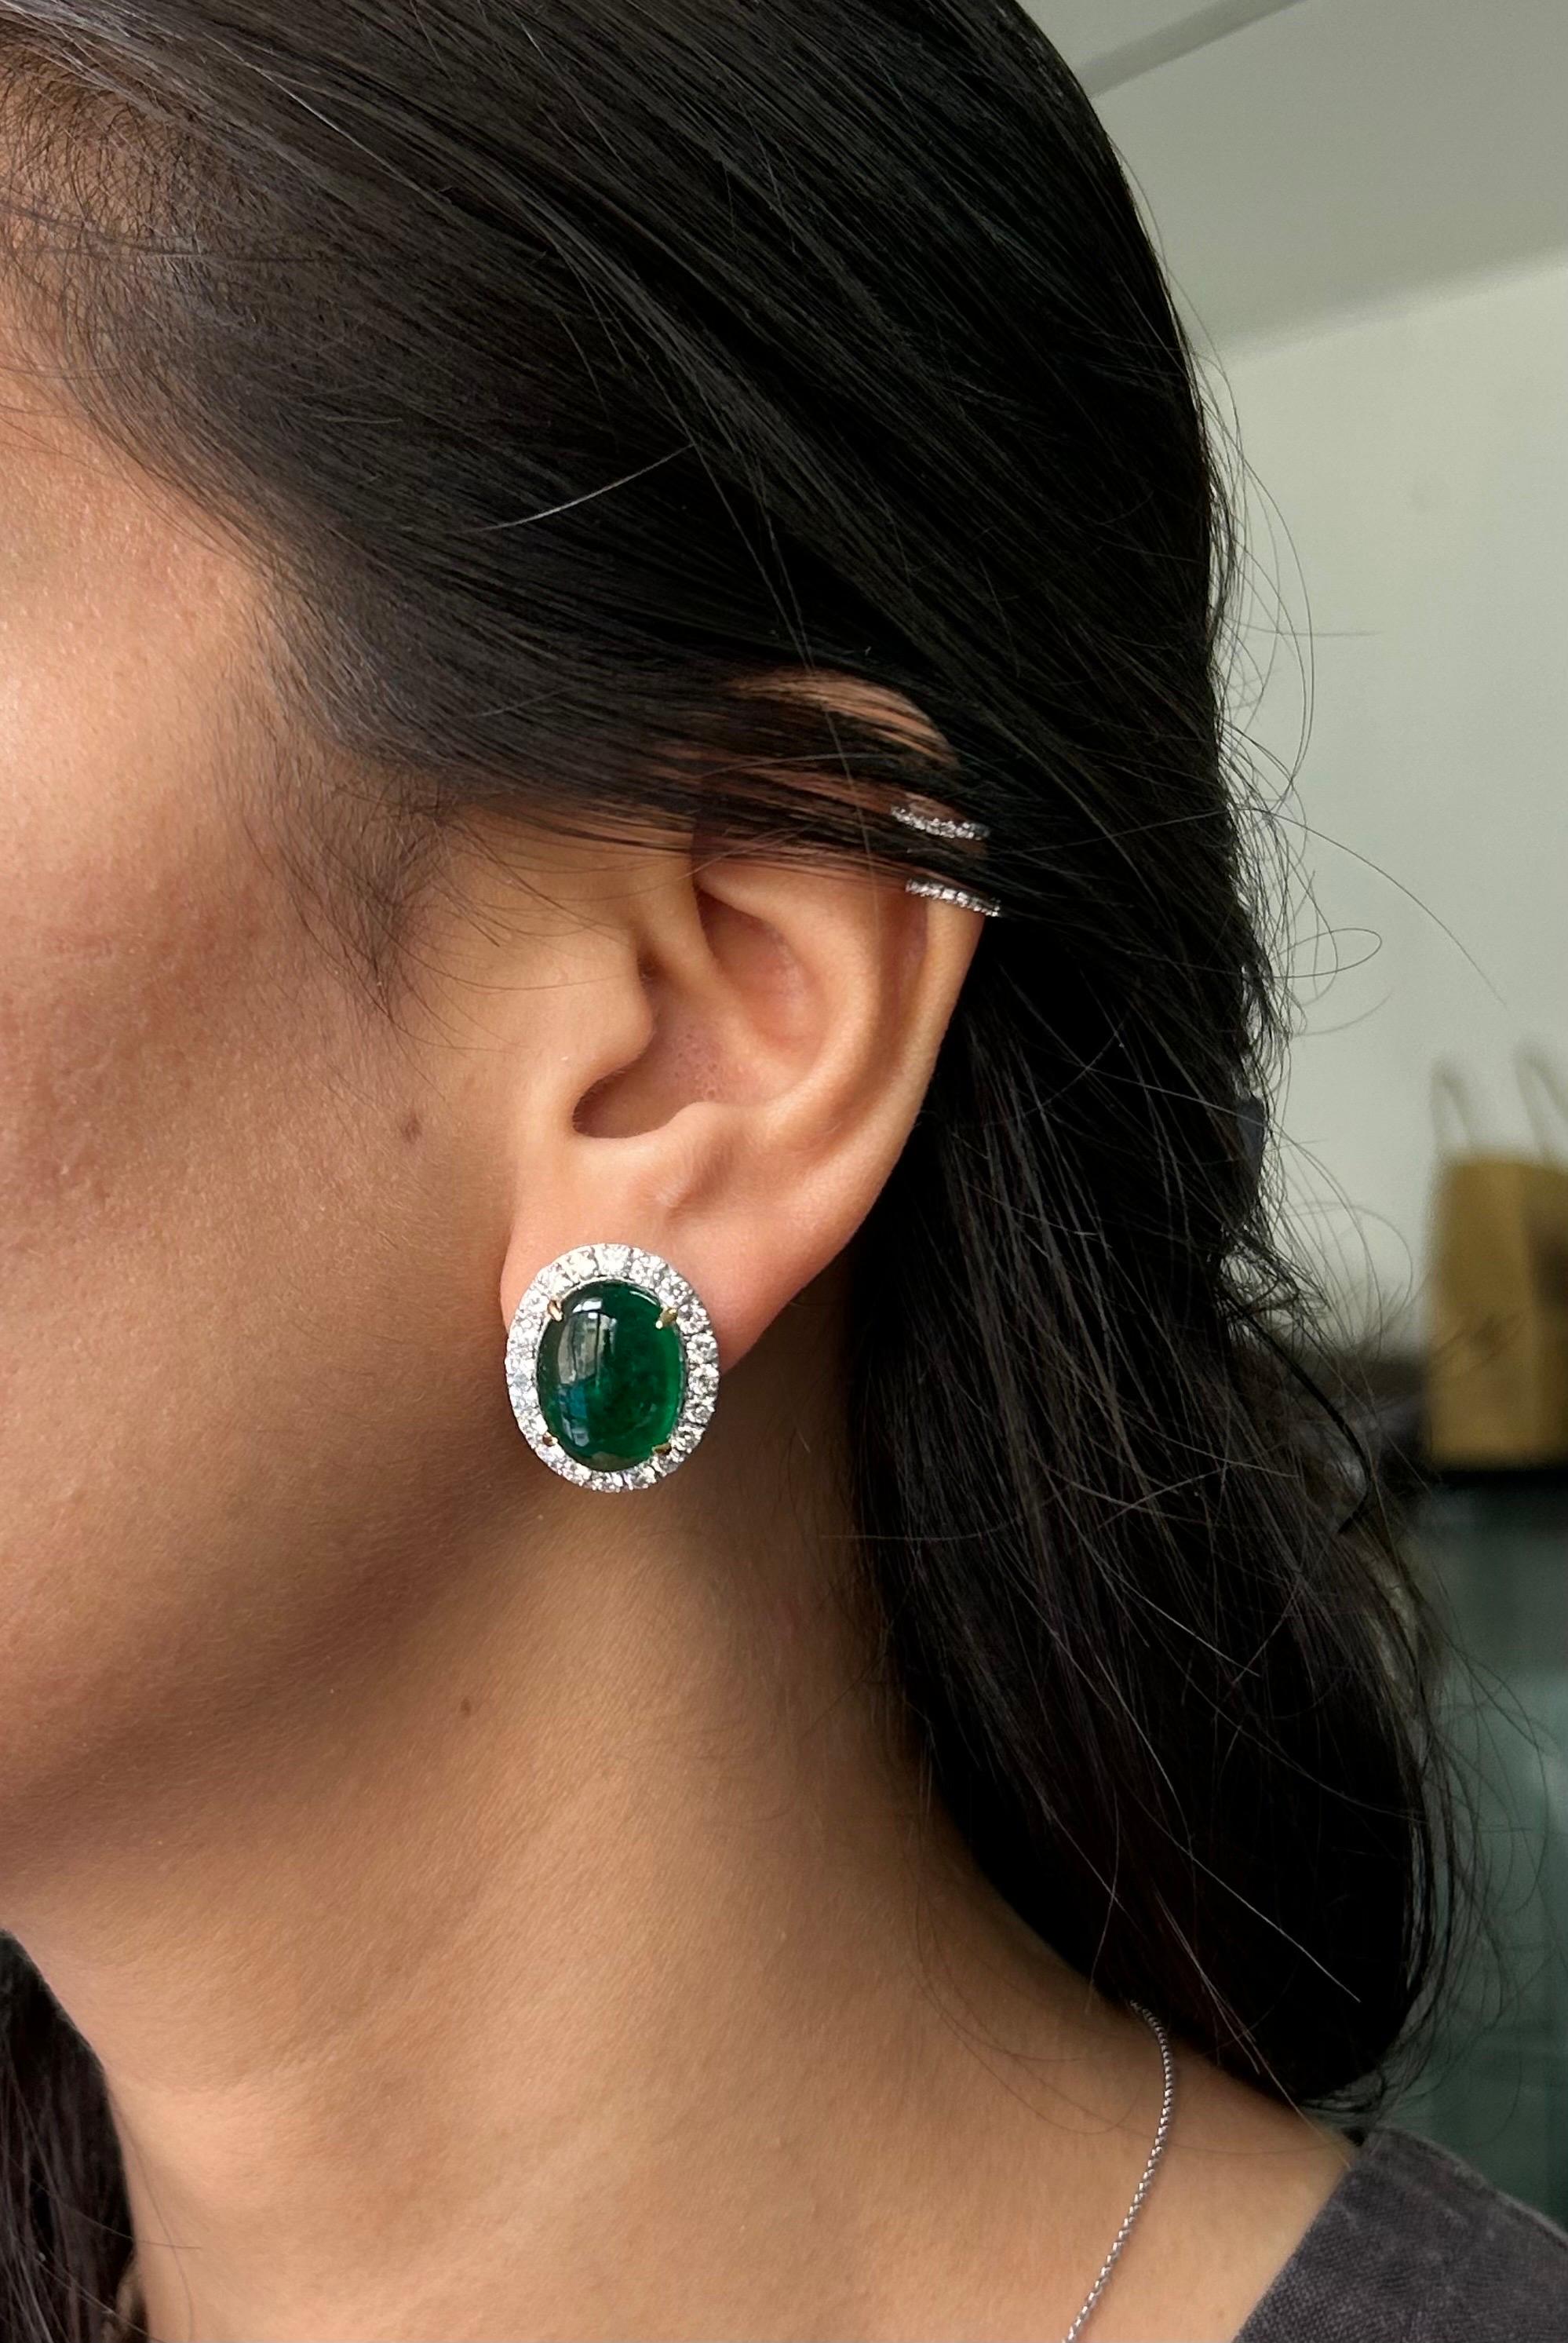 21.36 Carat Zambian Emerald Cabochon and Diamond Studs Earring In New Condition For Sale In Bangkok, Thailand